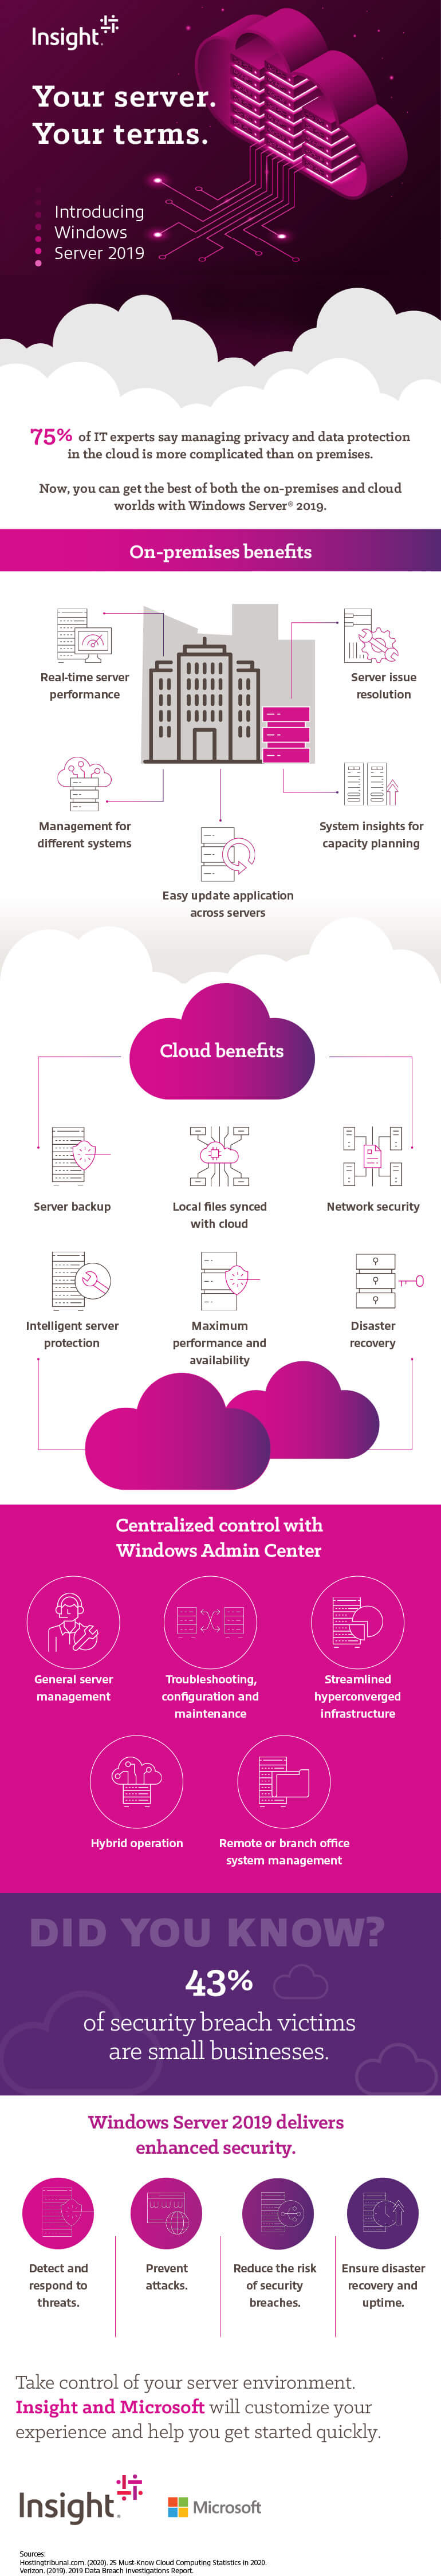 Your Server Your Way: Windows Server 2019 infographic as transcribed below